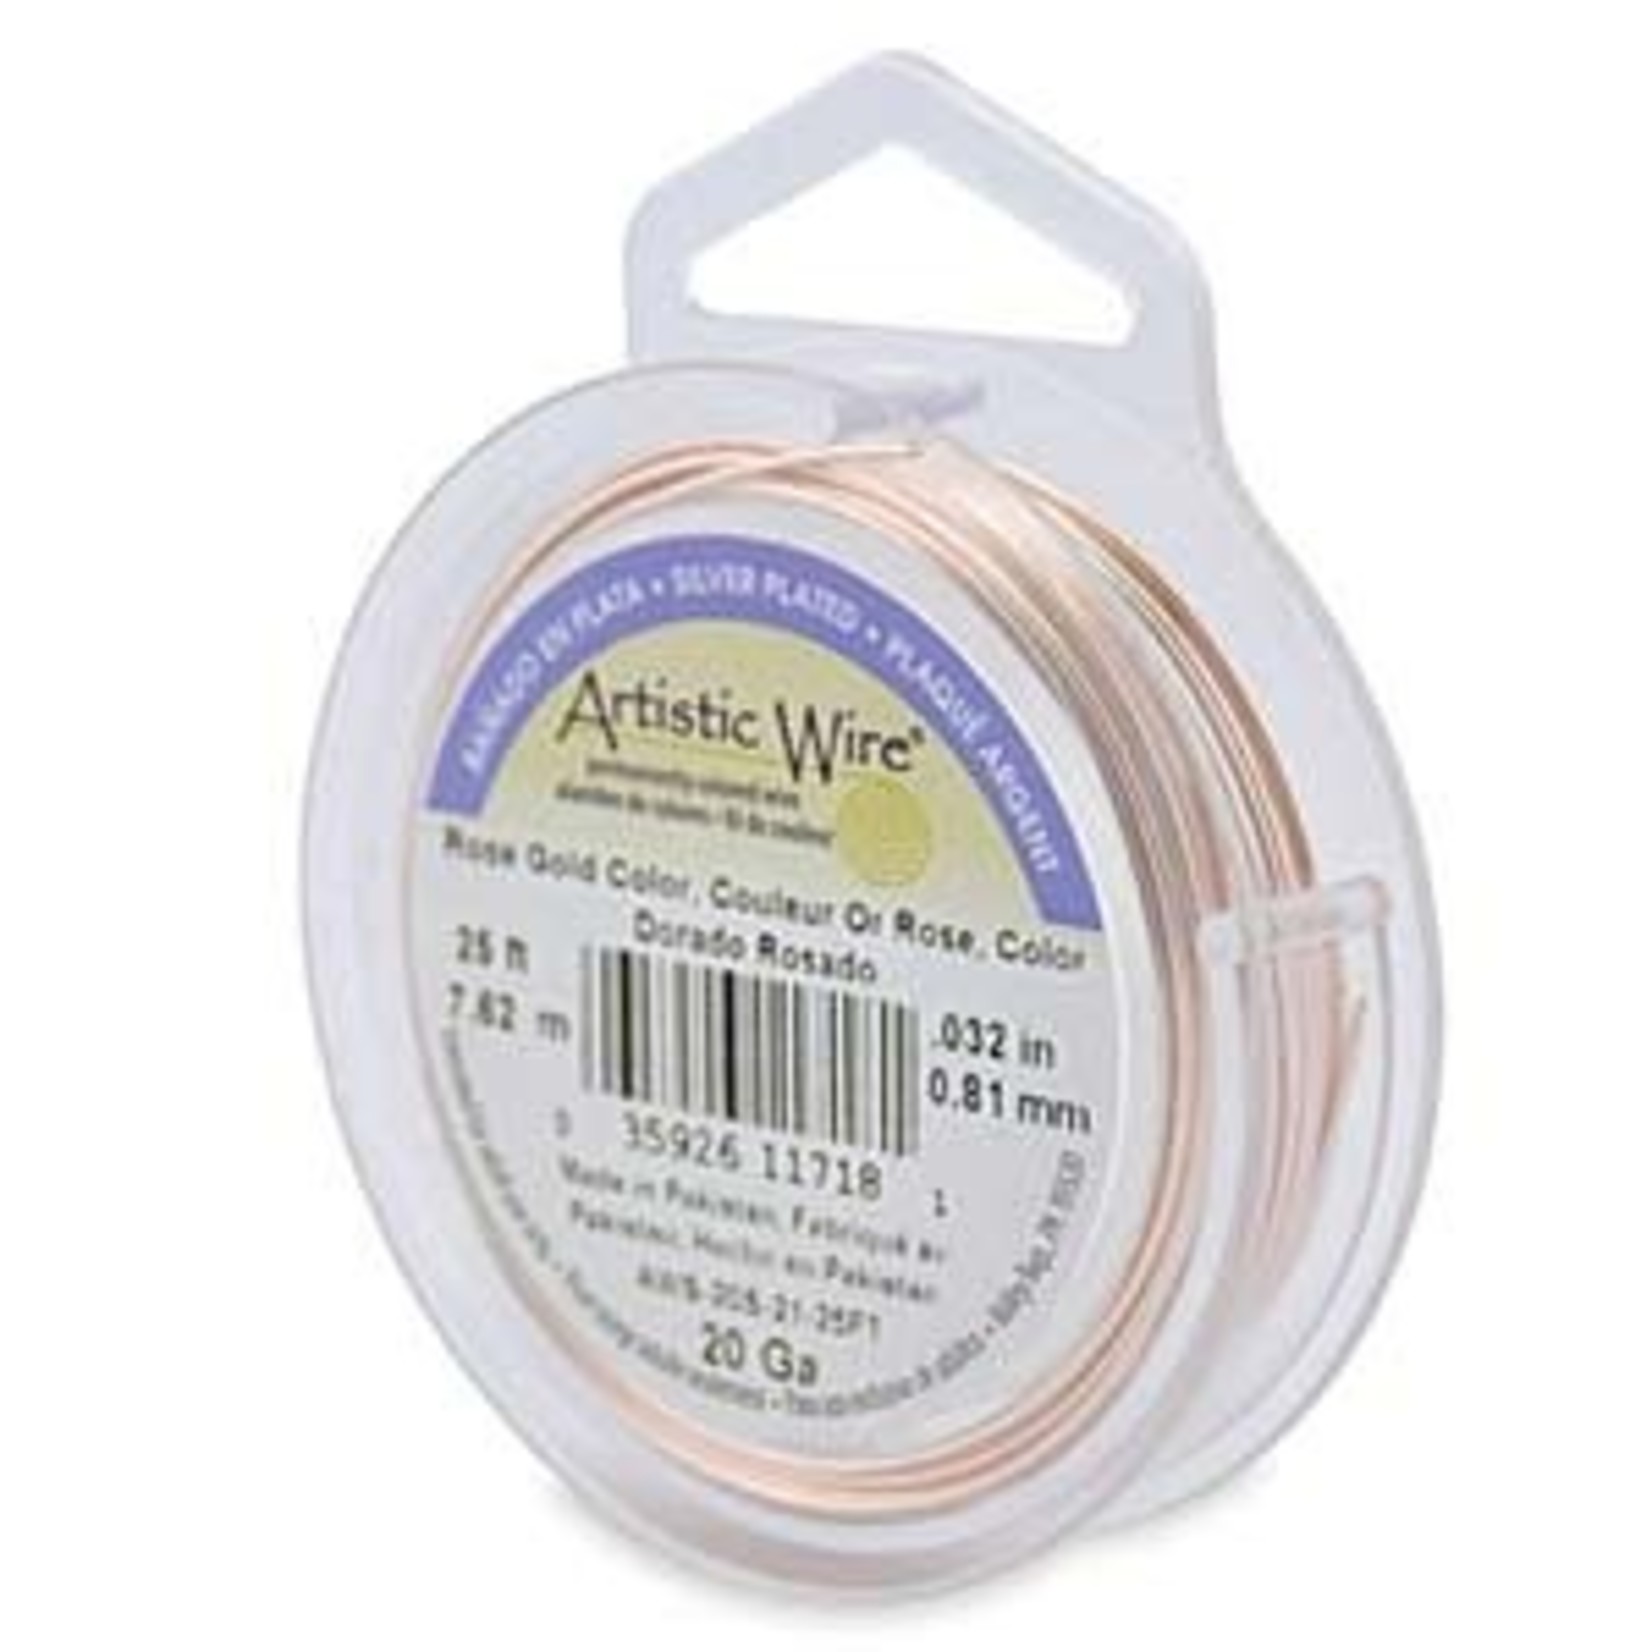 Artistic Wire Artistic Wire Rose Gold, 20 Gauge, 25 Foot Spool